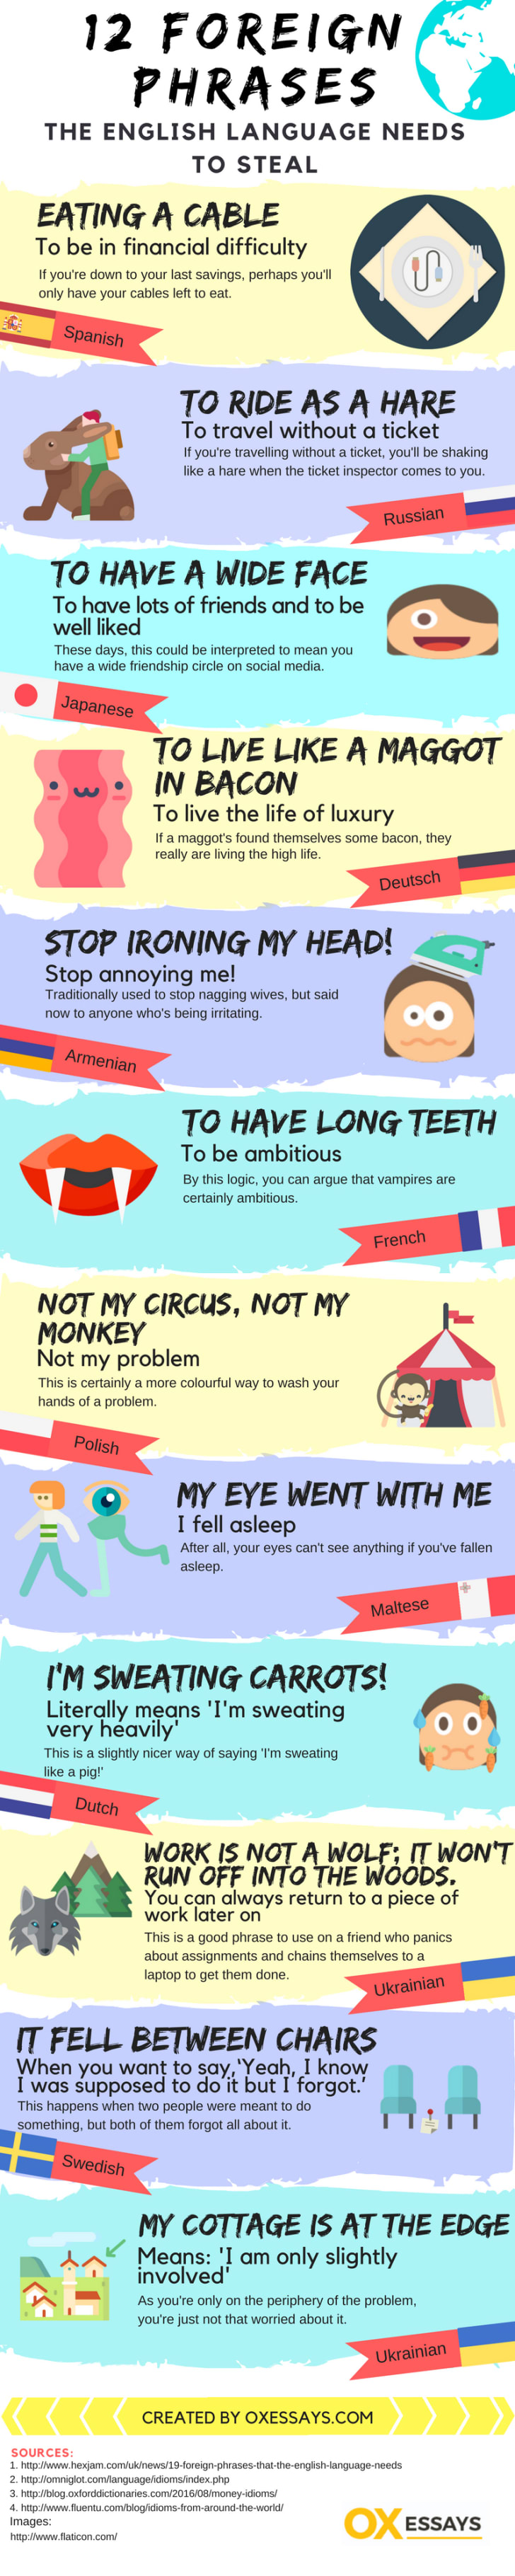 12 Fantastic Foreign Phrases We Should All Be Using Mental Floss